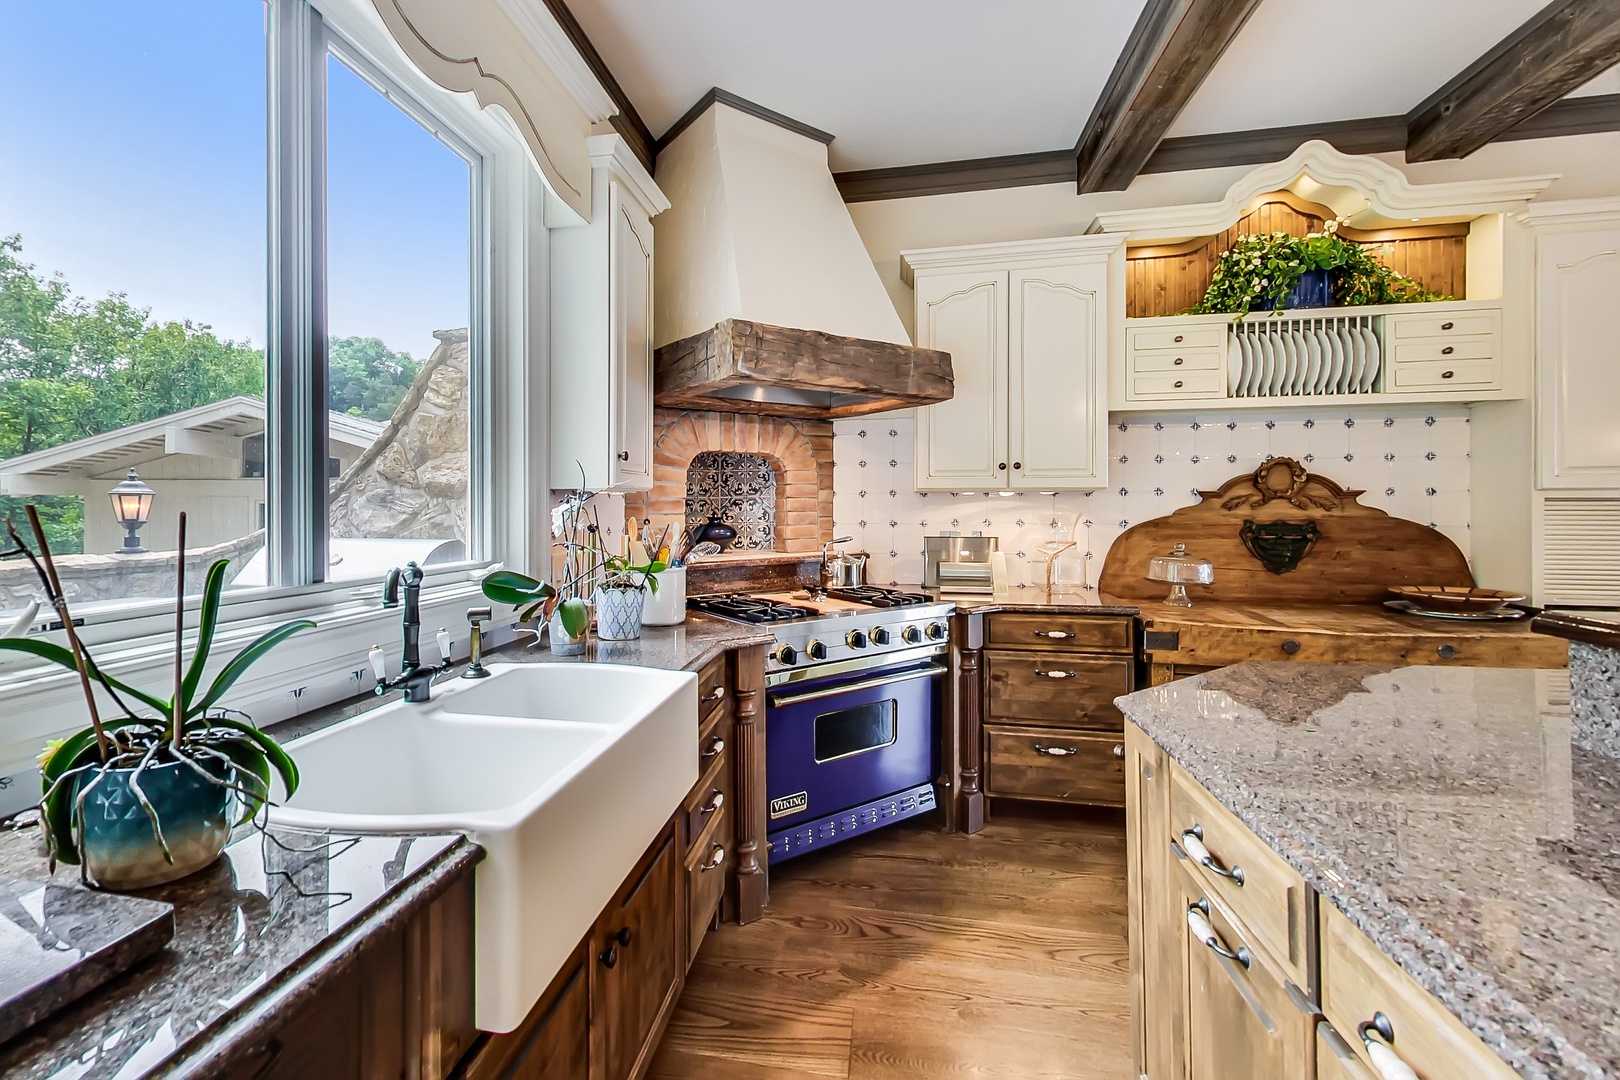 Even Gordon Ramsay would love this gorgeous, fully equipped Chef's Kitchen.